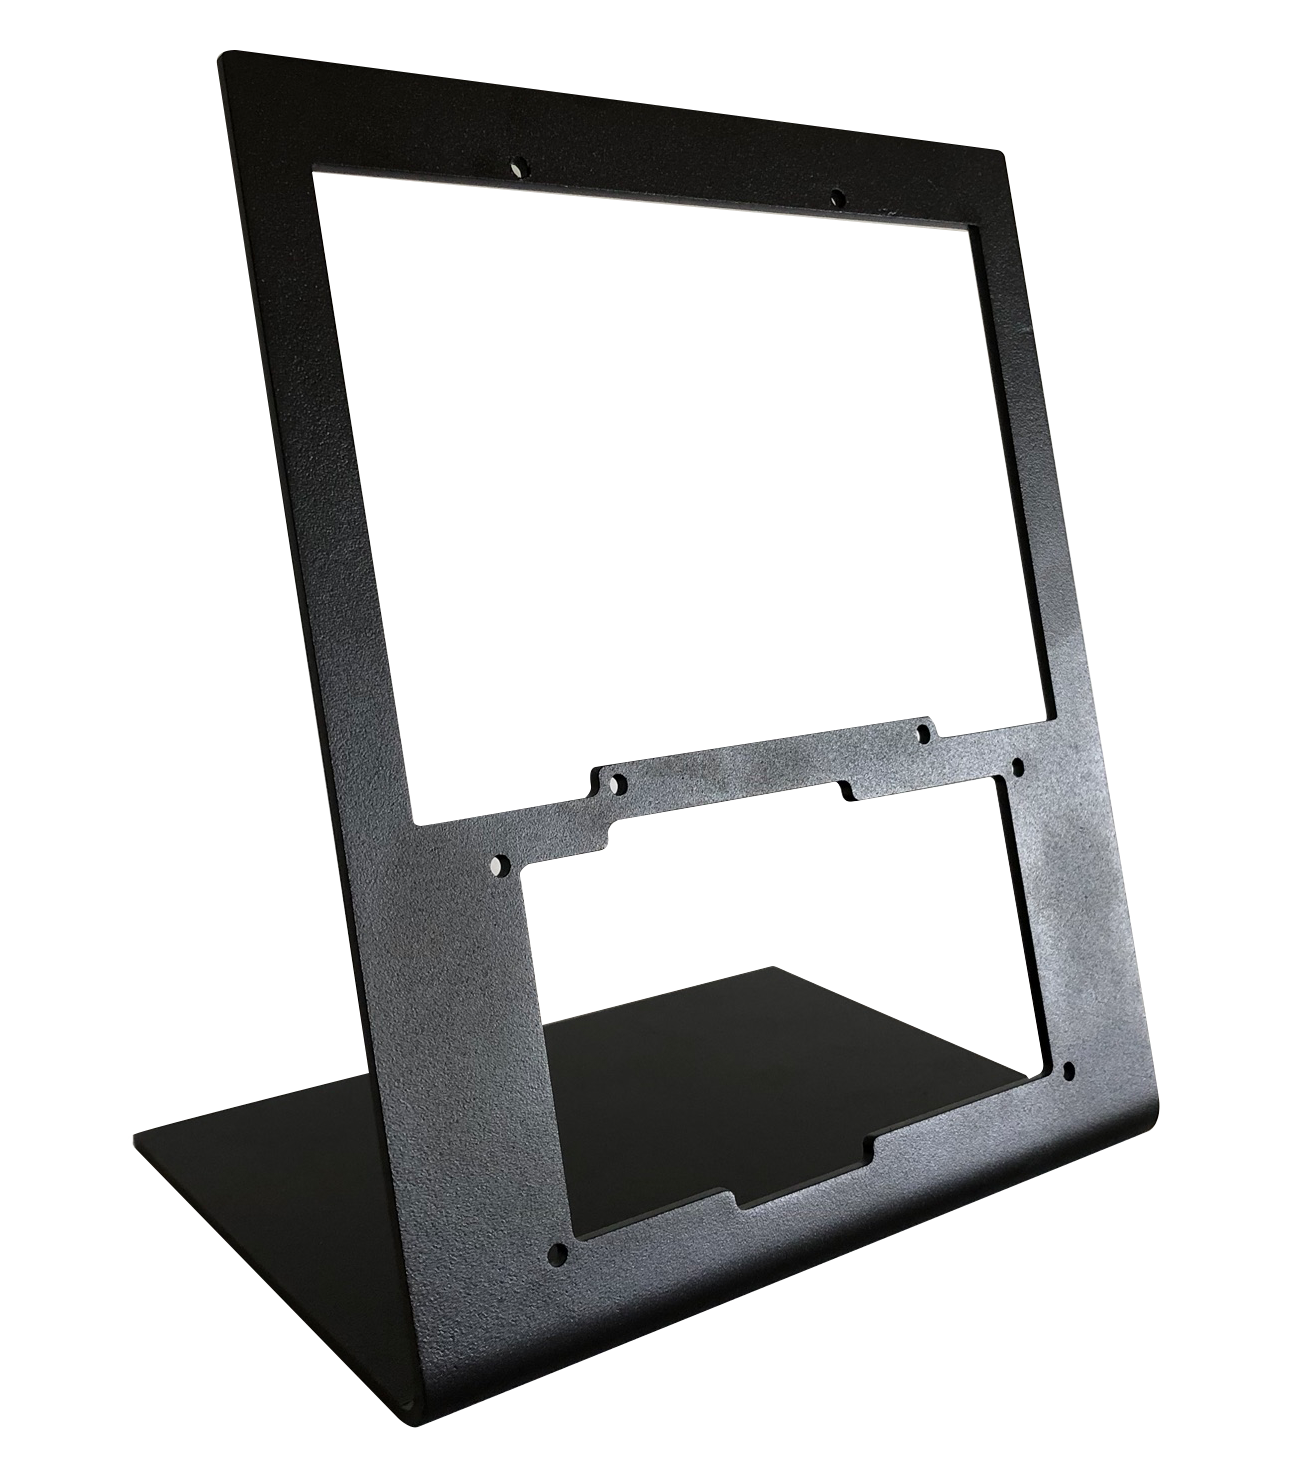 Dual Desktop stand for RealSimGear GNS530 & GNS430